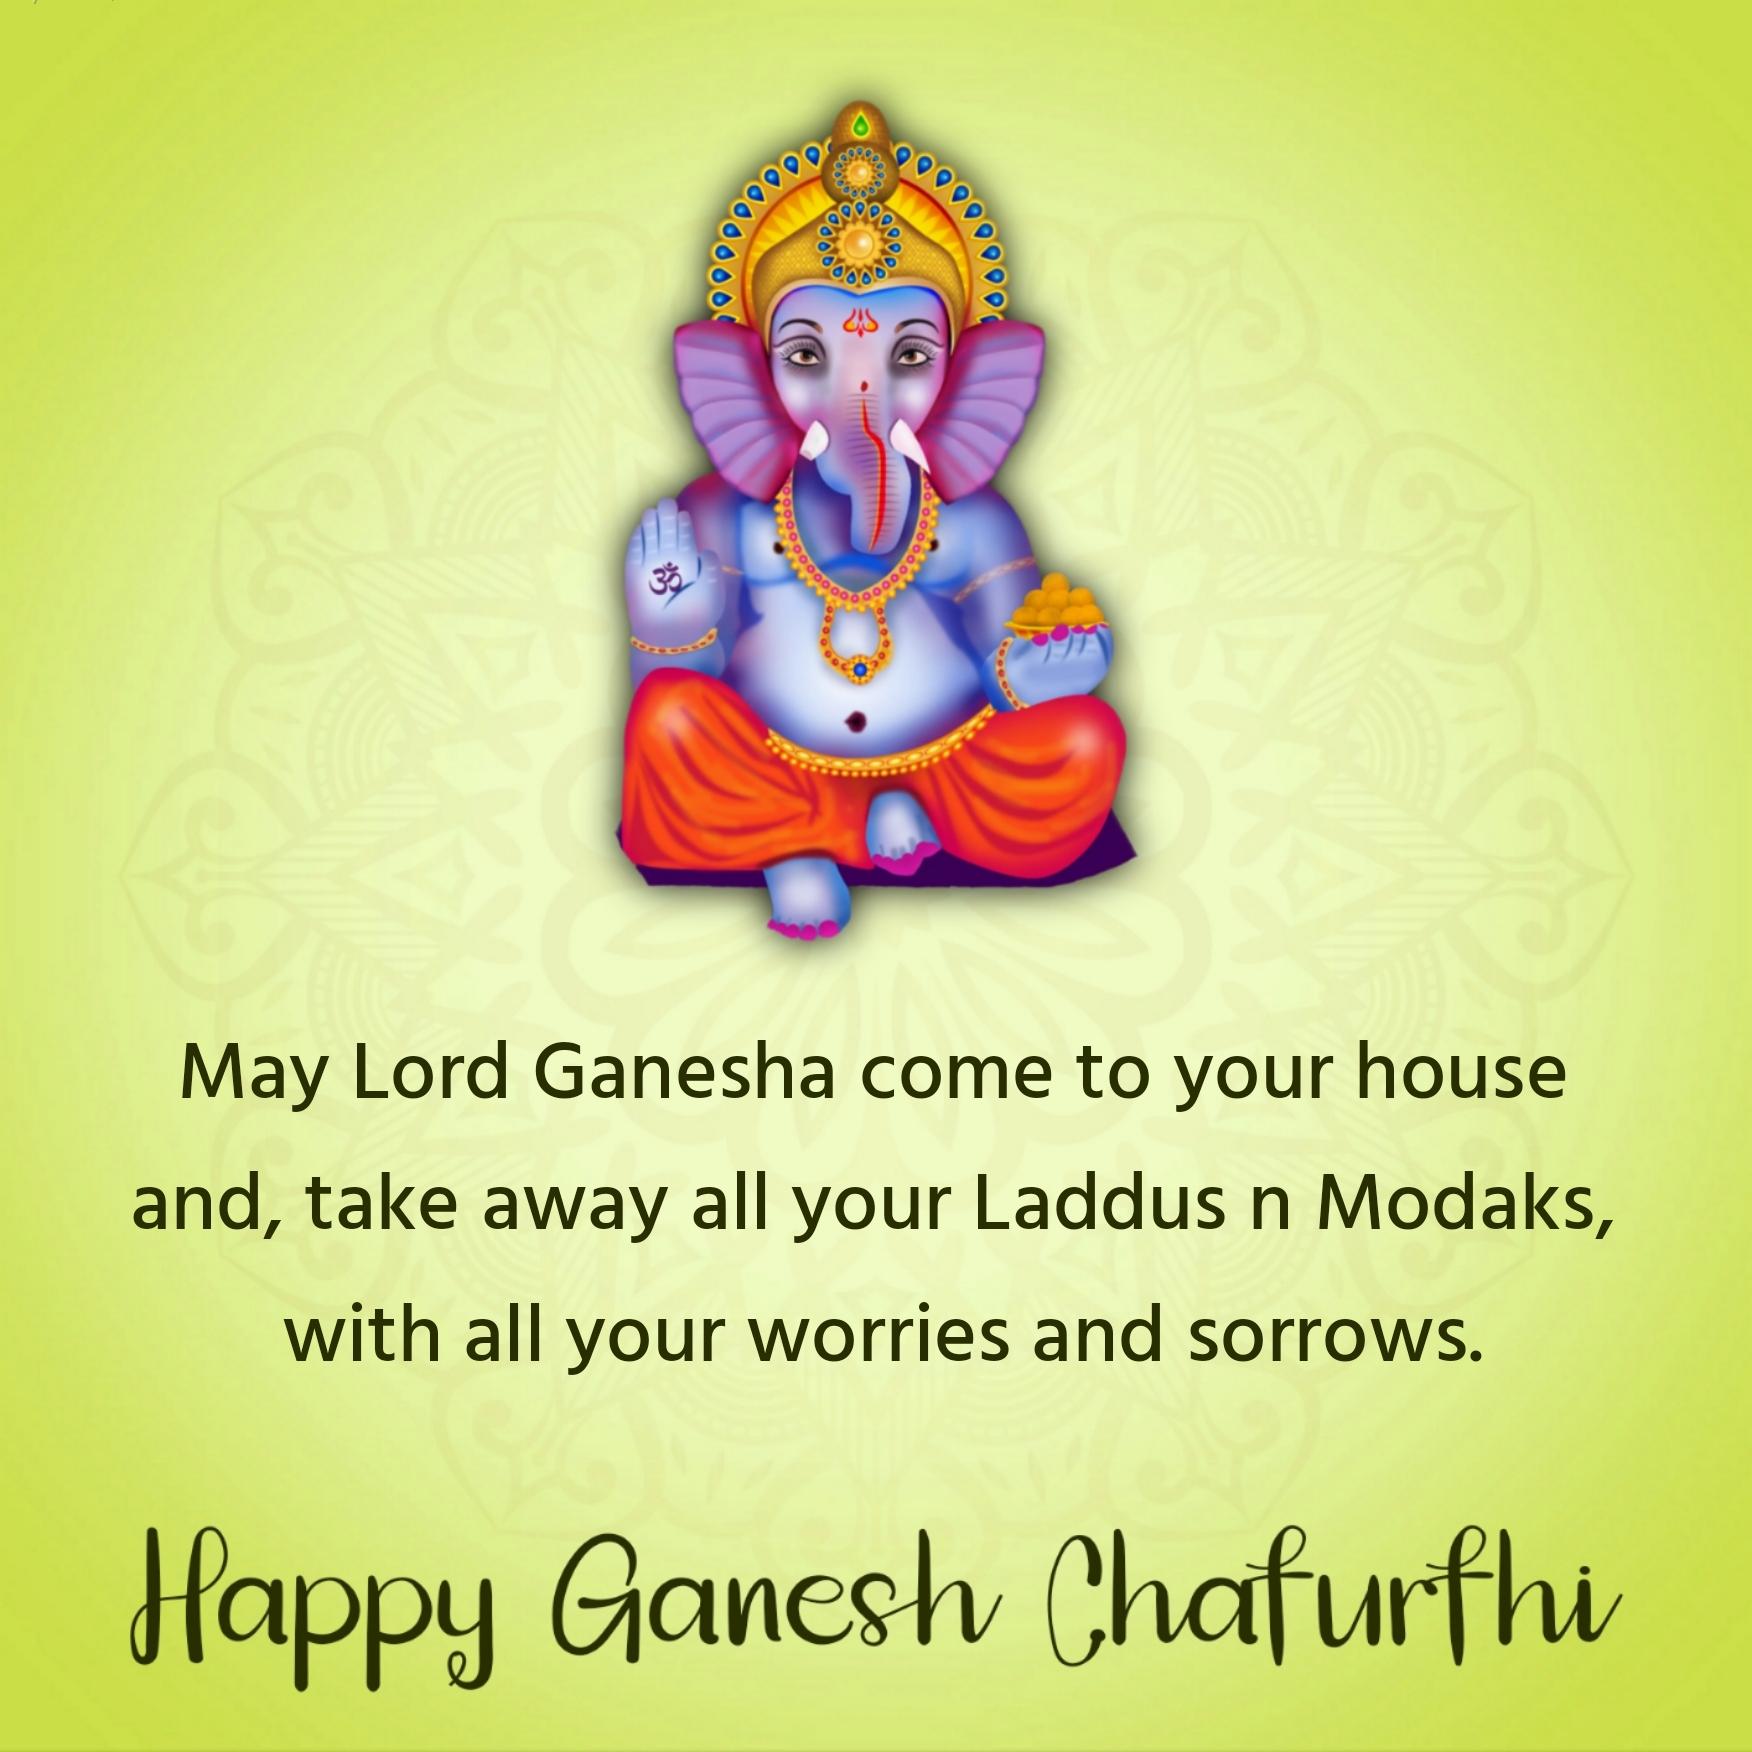 May Lord Ganesha come to your house